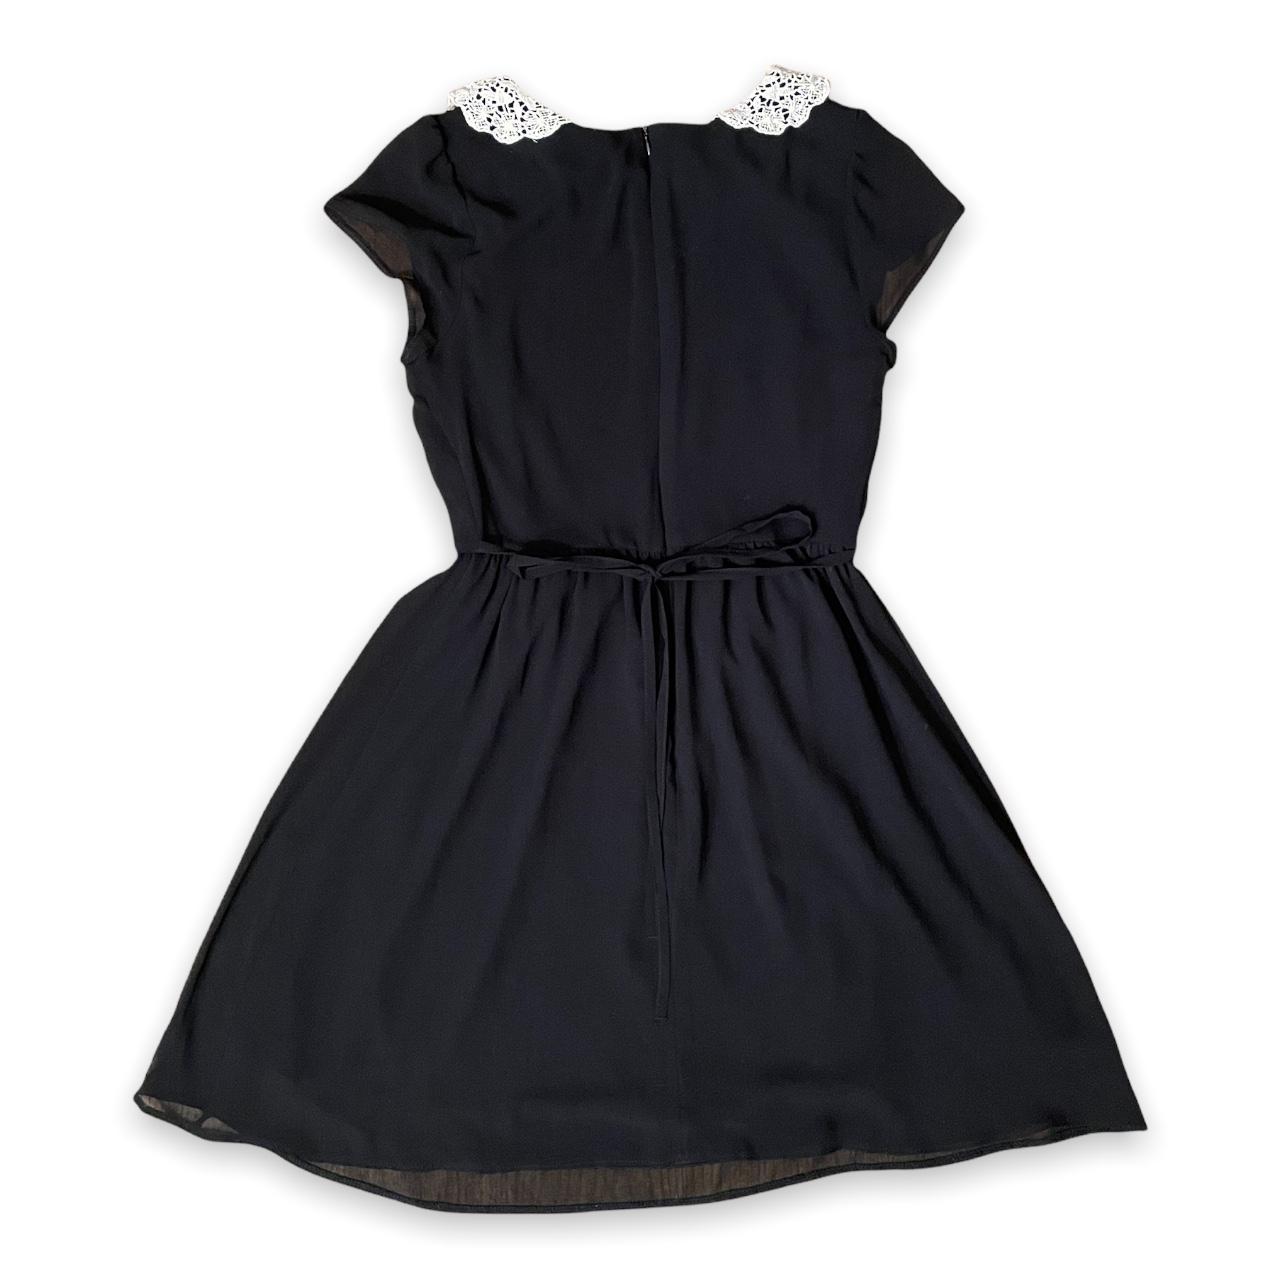 New Look Women's Black and White Dress (2)